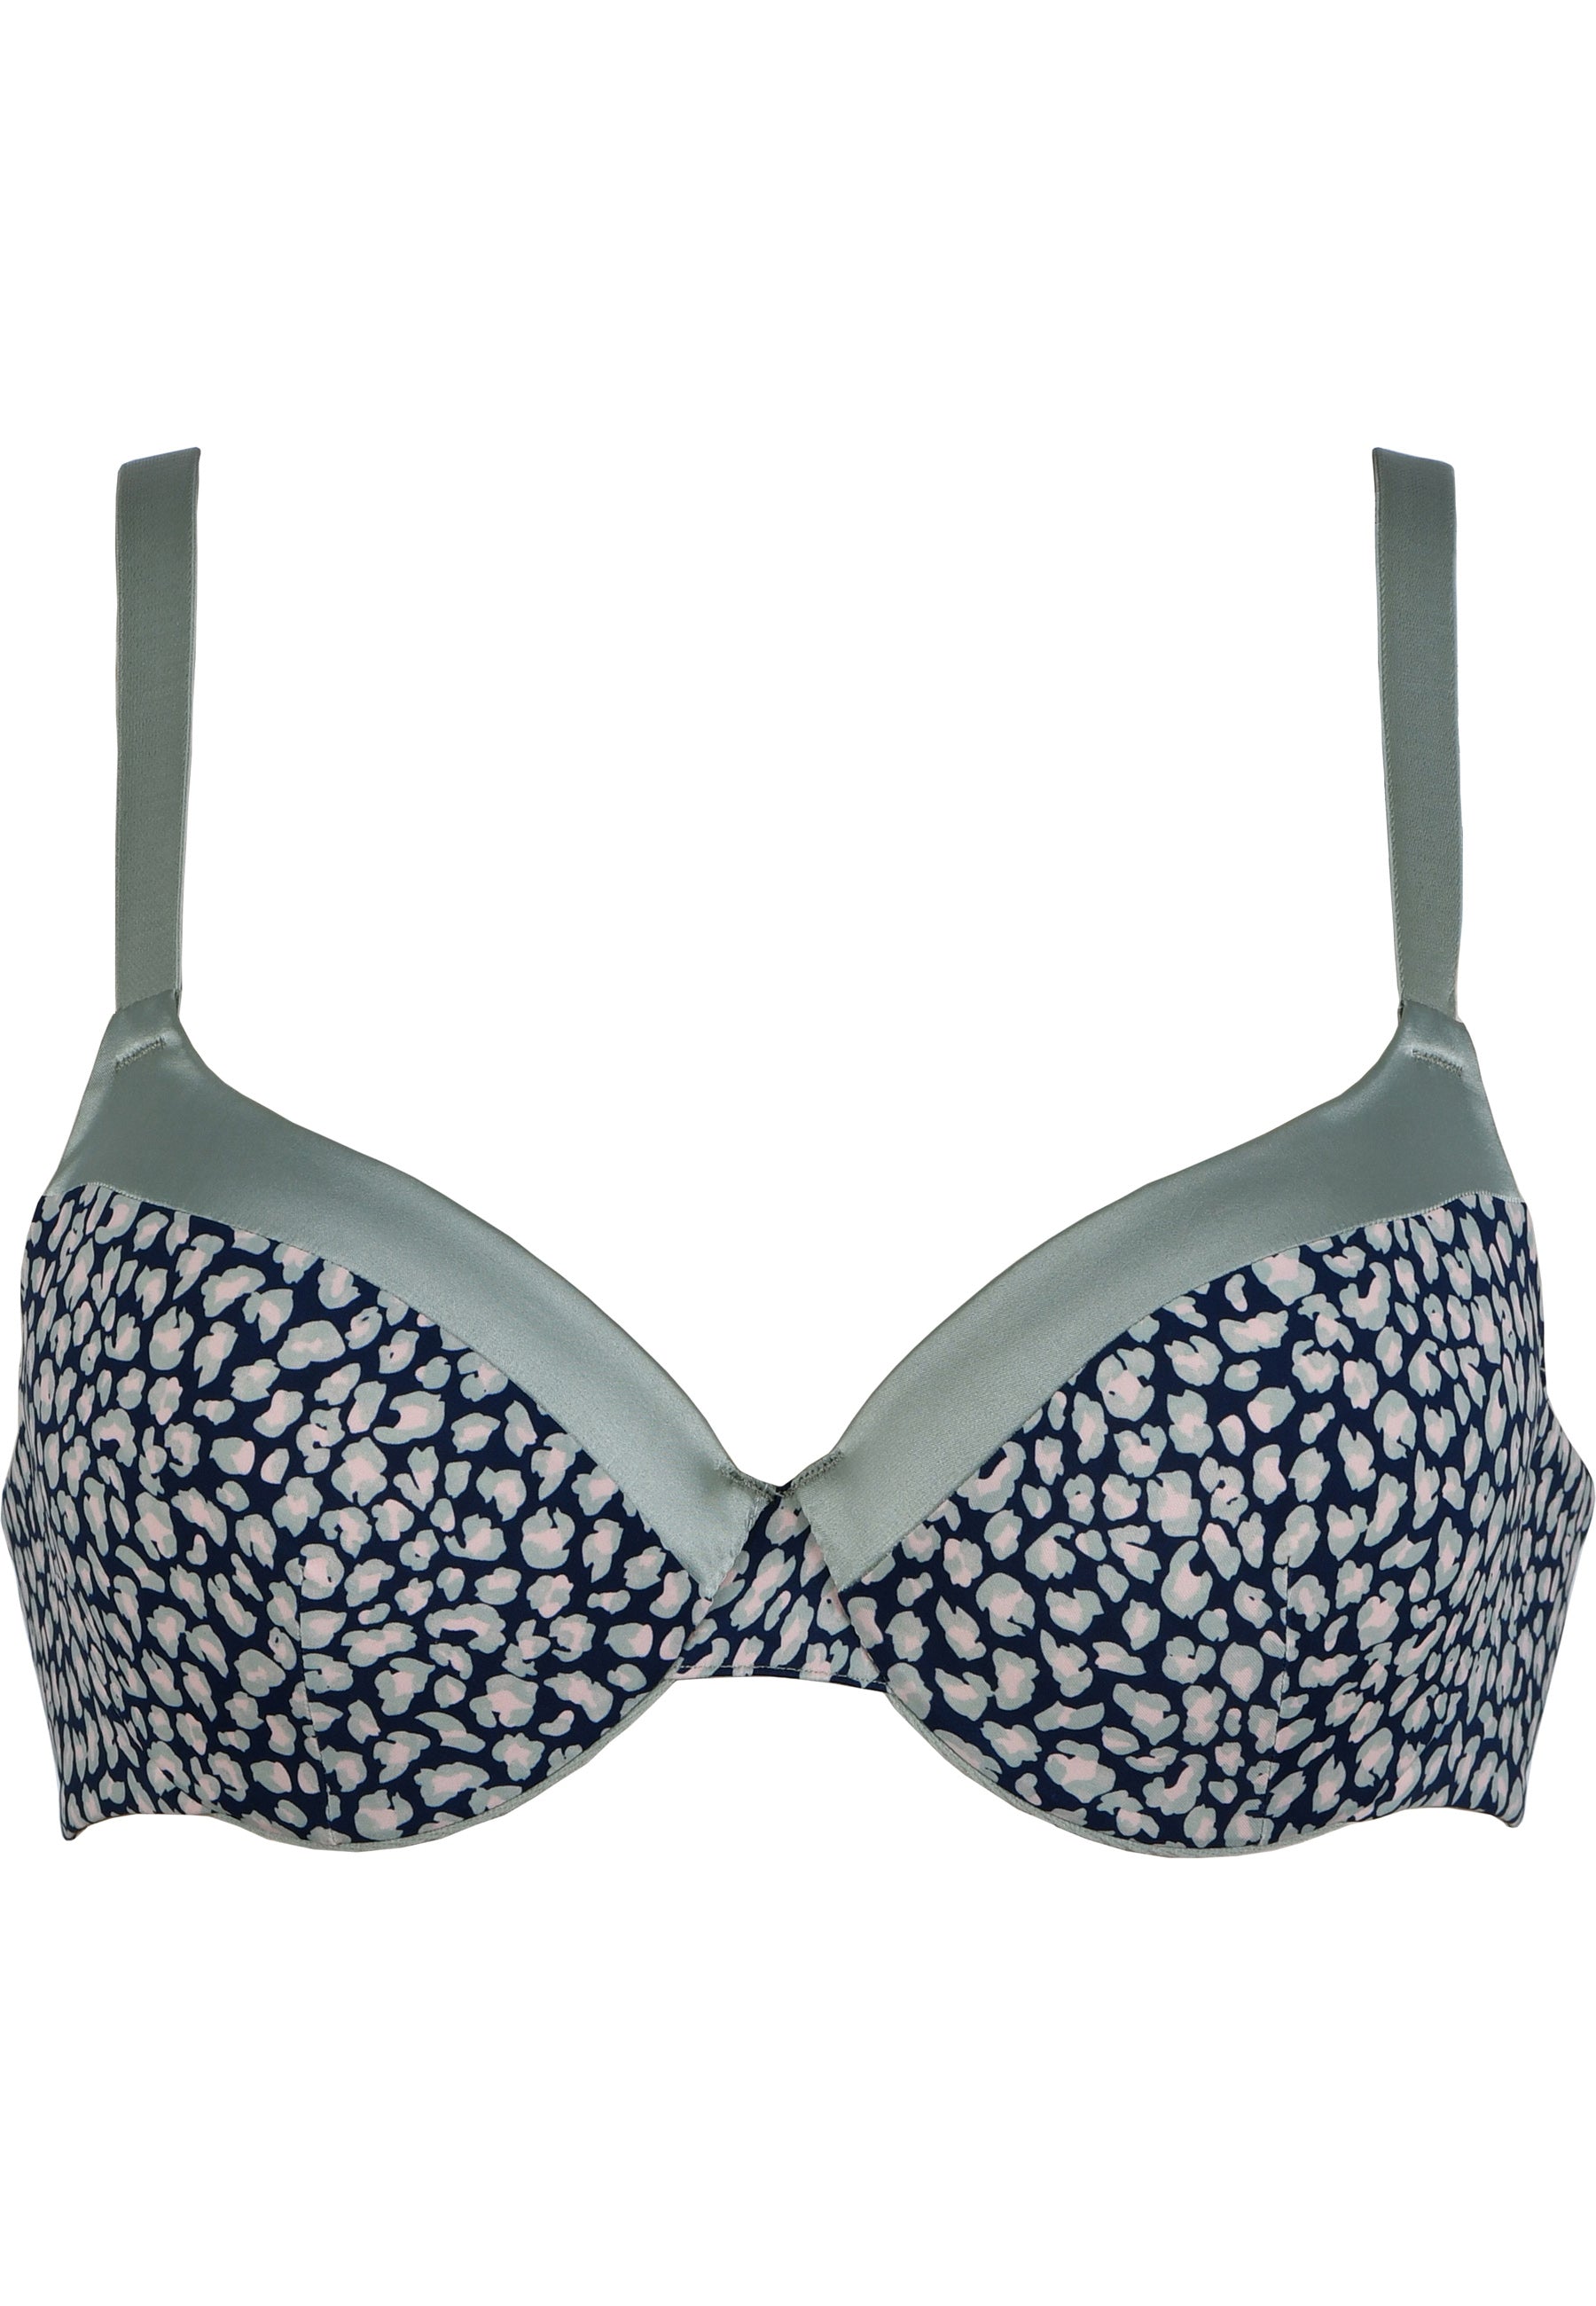 Underwired bra with cup - Leo Print